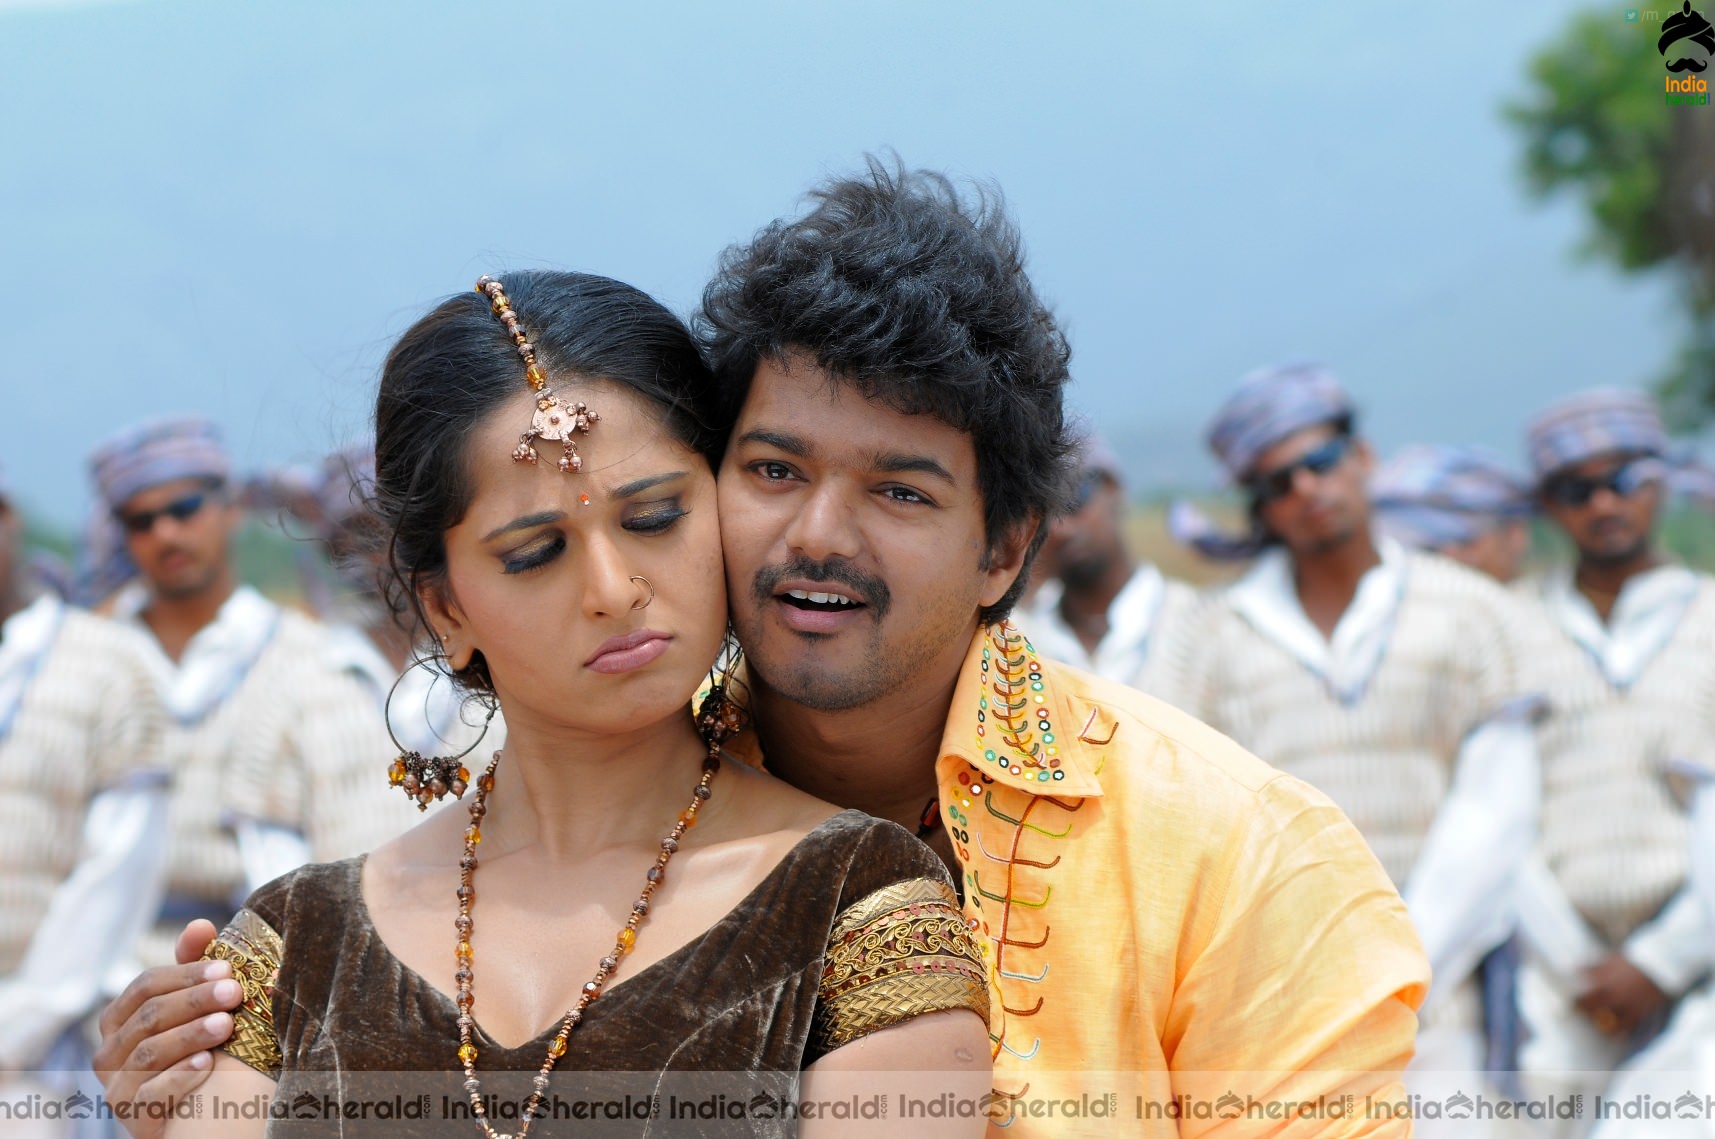 INDIA HERALD EXCLUSIVE Hot Anushka Shetty and Vijay in a Tamil movie during Early Stages Set 3